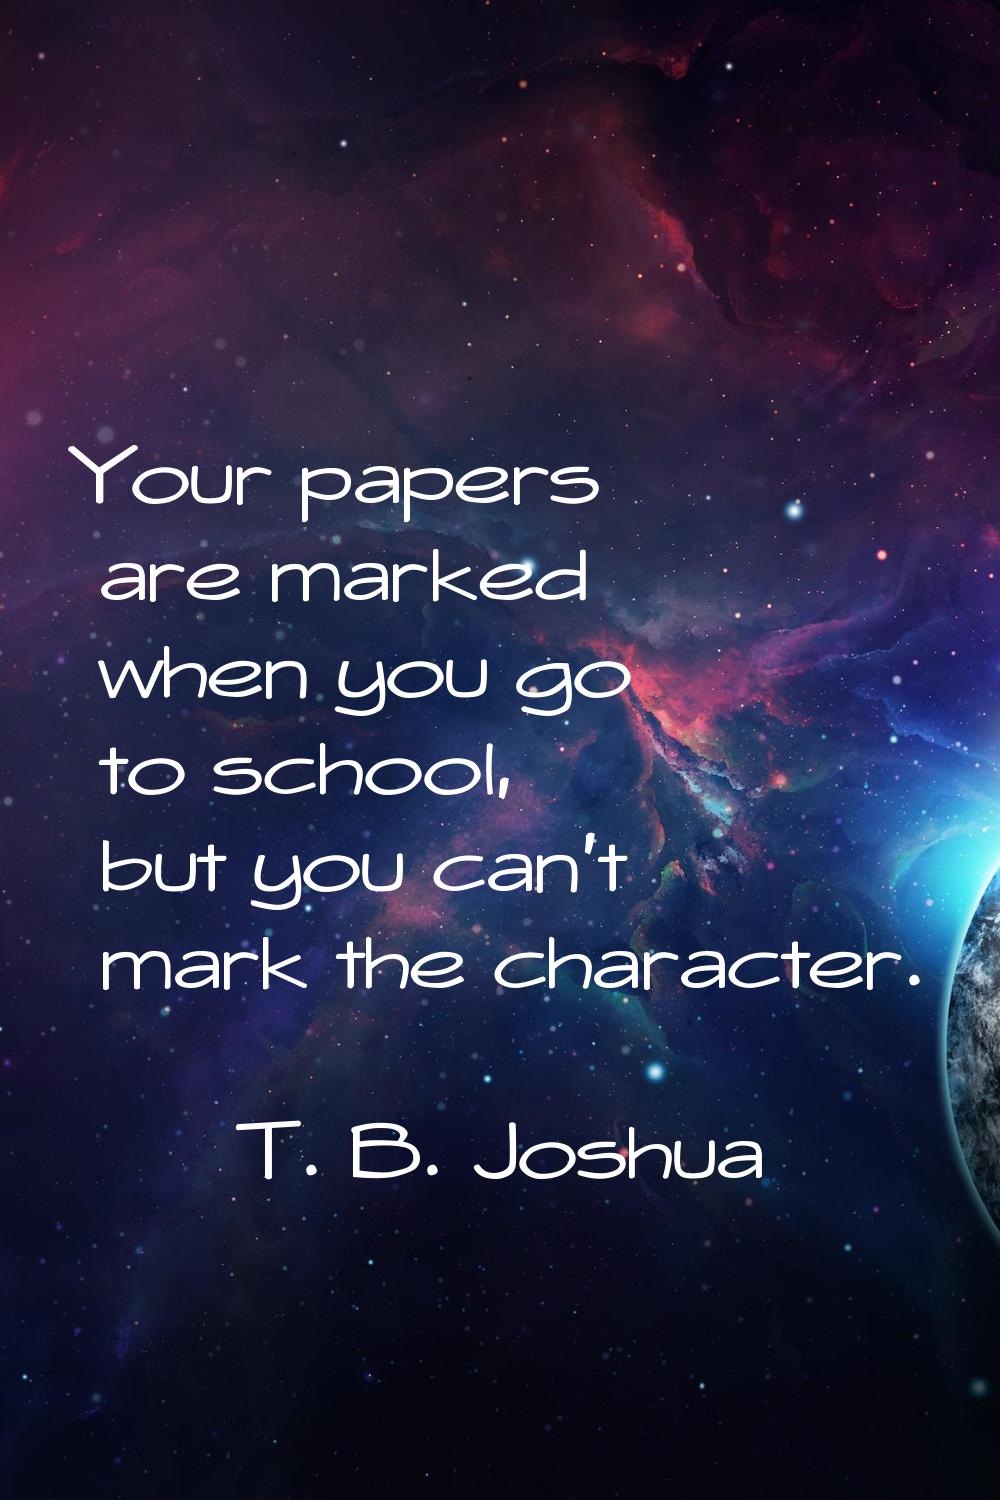 Your papers are marked when you go to school, but you can't mark the character.